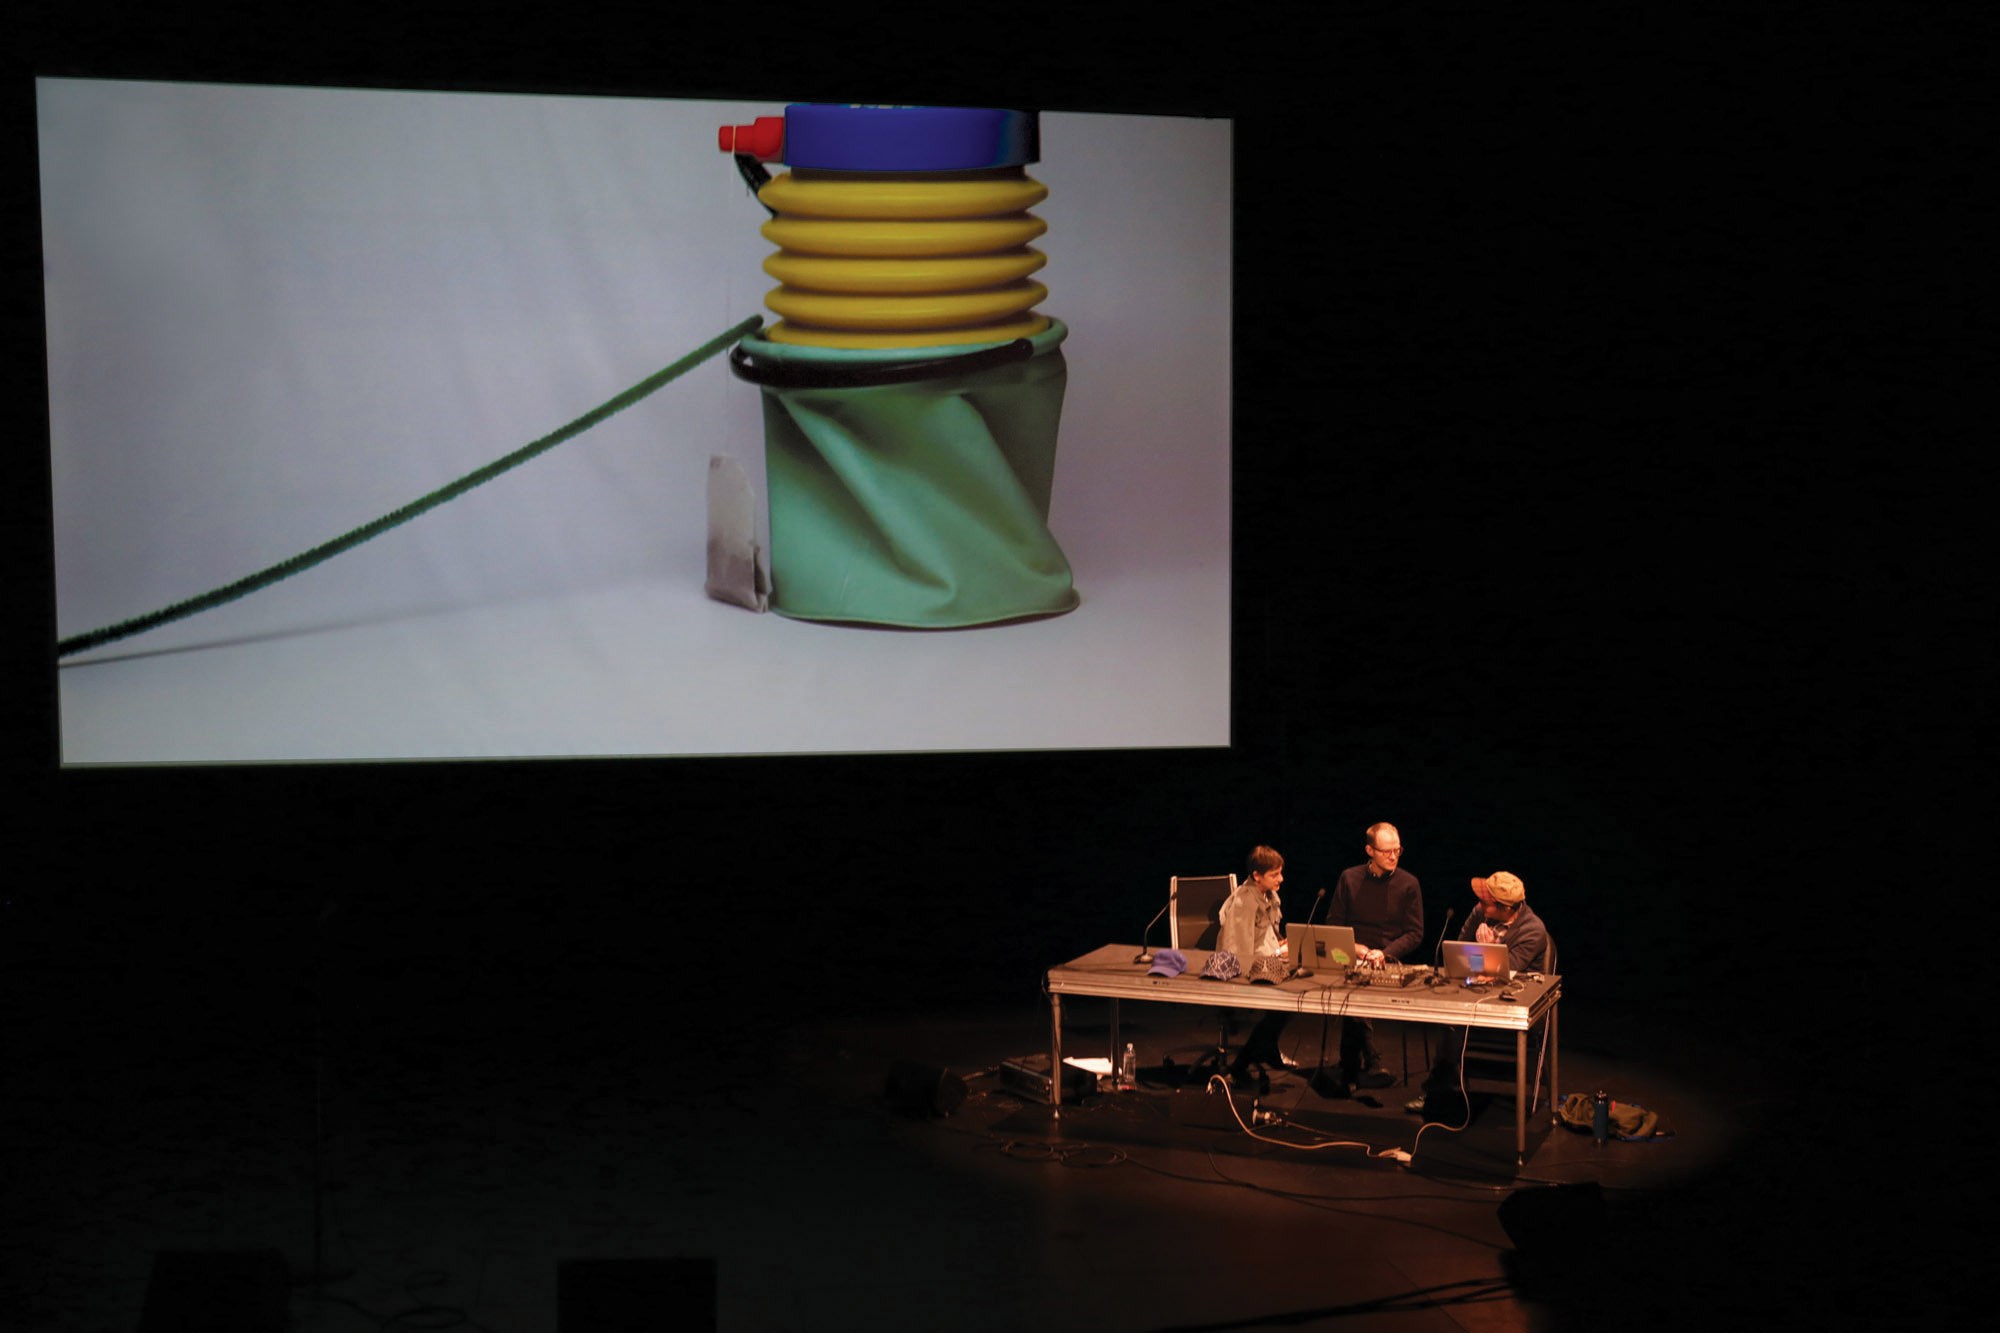 Three people sitting on stage behind a cluttered desk in front of a large screen projecting and image of a green yellow blue sculpture 